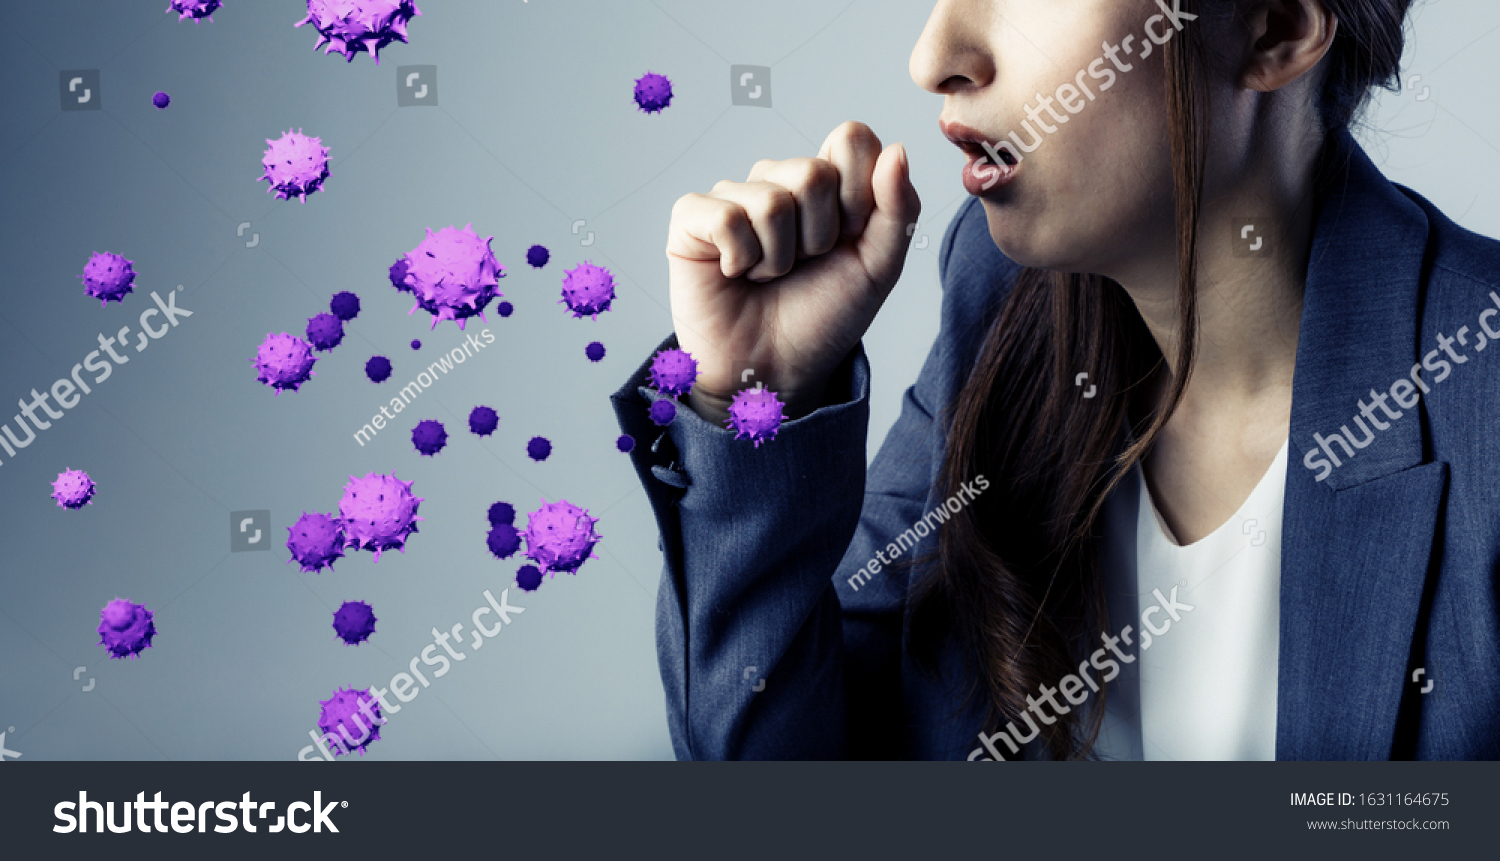 Viral infection concept. Floating virus. #1631164675